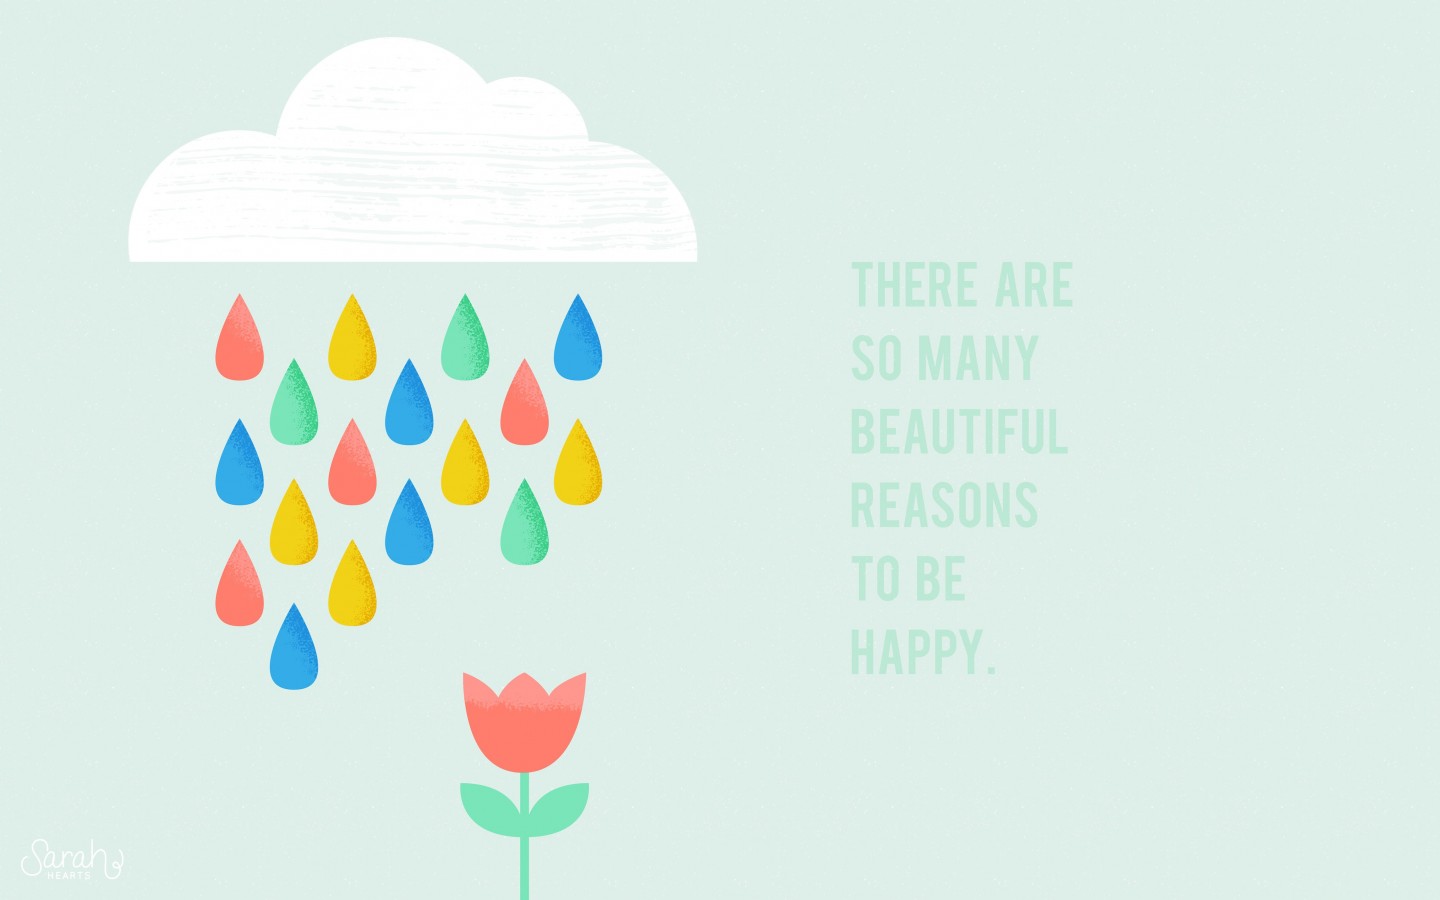 There are so many reasons to be happy Wallpaper for Desktop 1440x900